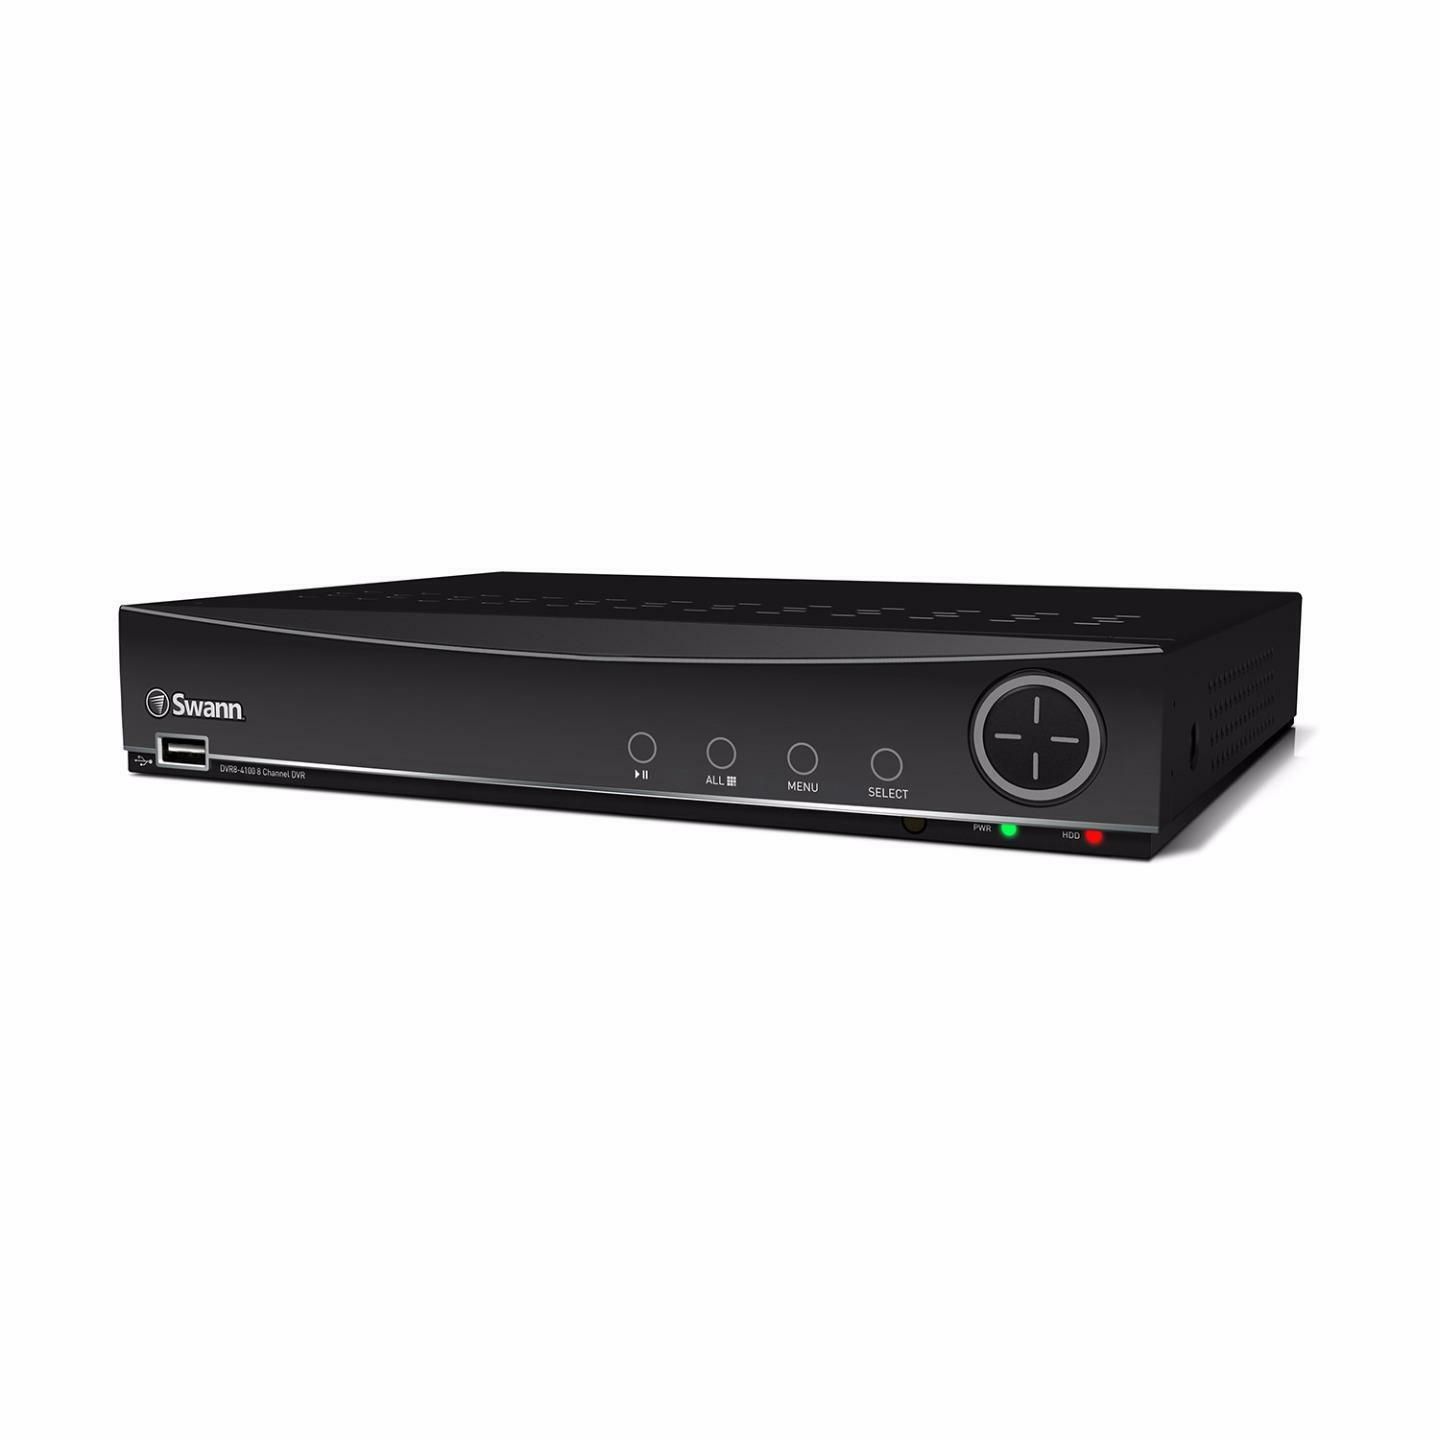 Swann SWDVR-84100 8 Channel 960H Digital Video Recorder with 2TB Hard Drive